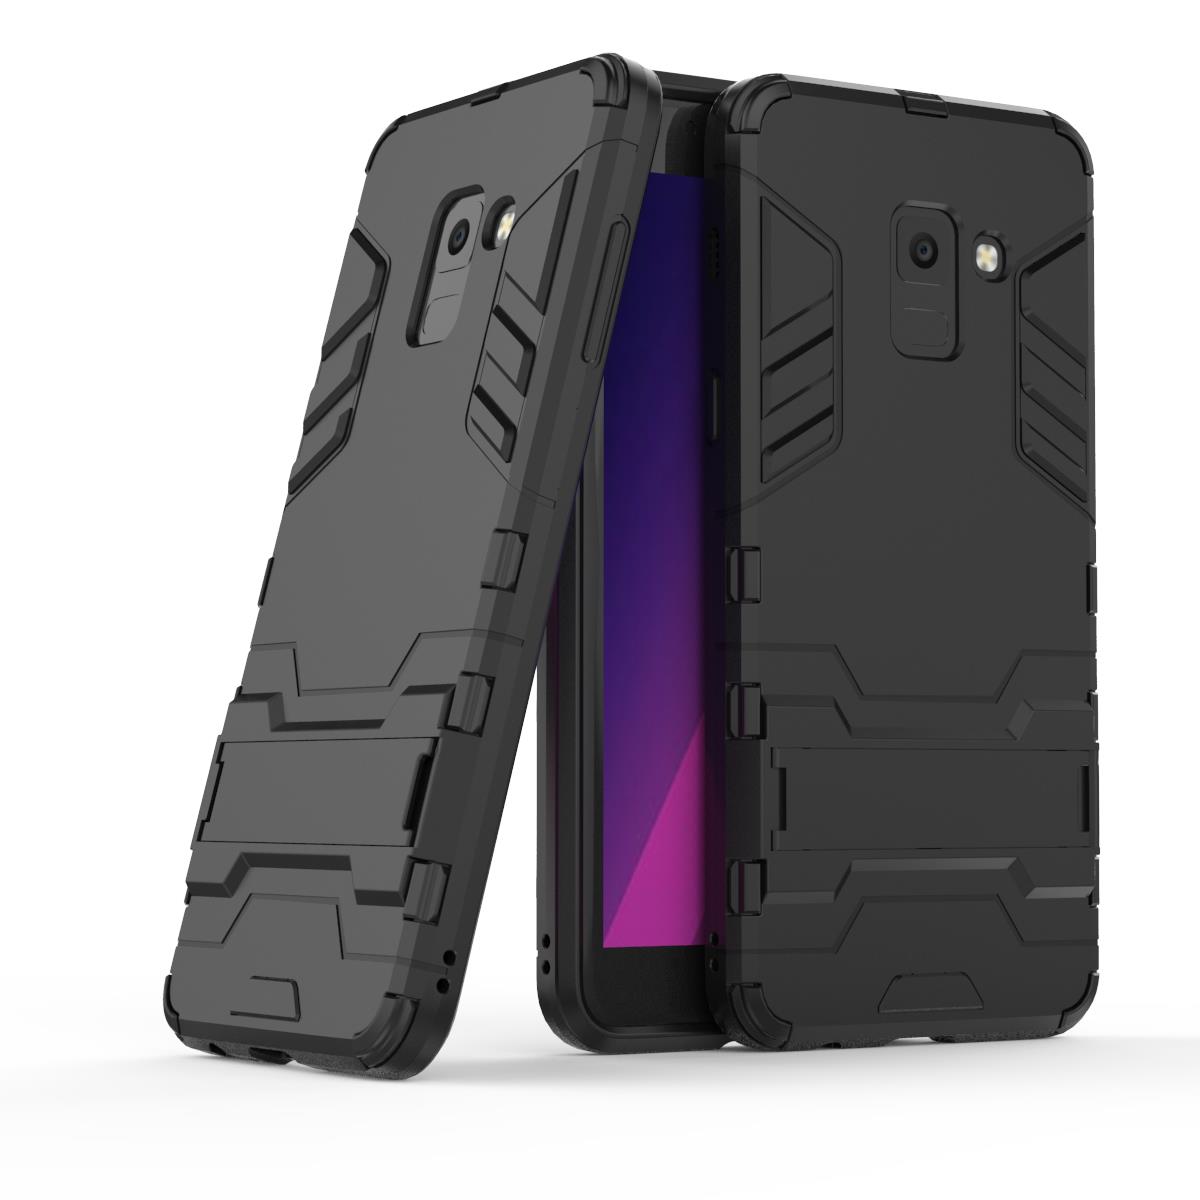 Bakeey-2-in-1-Armor-Kickstand-Hard-PC-Protective-Case-for-Samsung-Galaxy-A8-Plus-2018-1297009-8